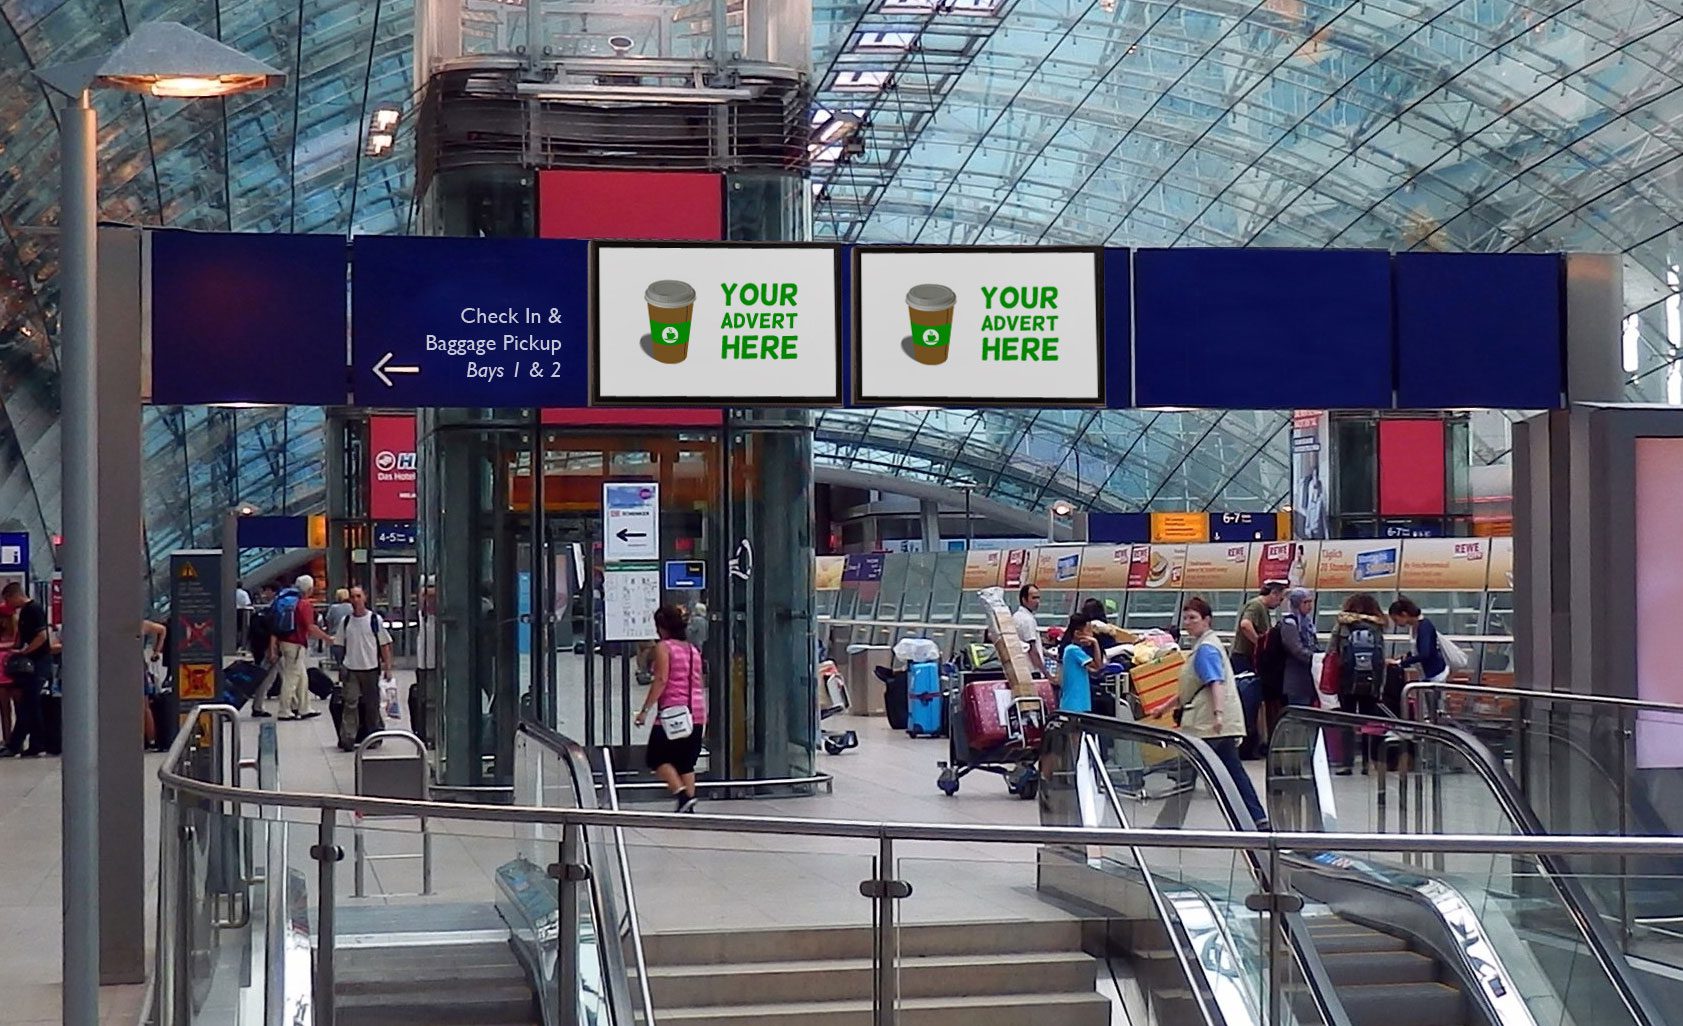 LED display Signs used to advertise at airport